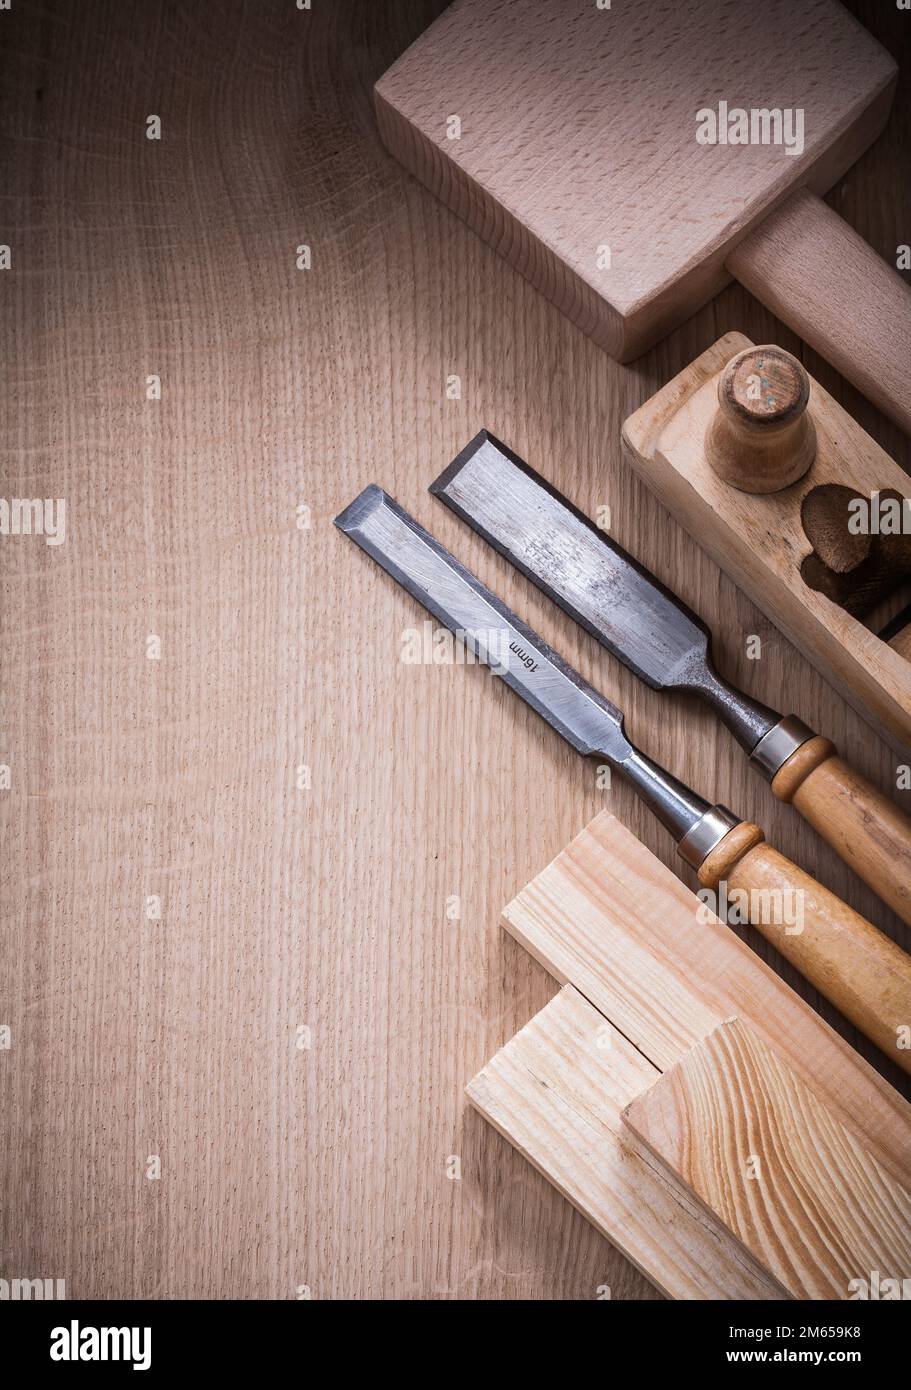 Collection of wooden carpenter’s tools on wood board construction concept. Stock Photo